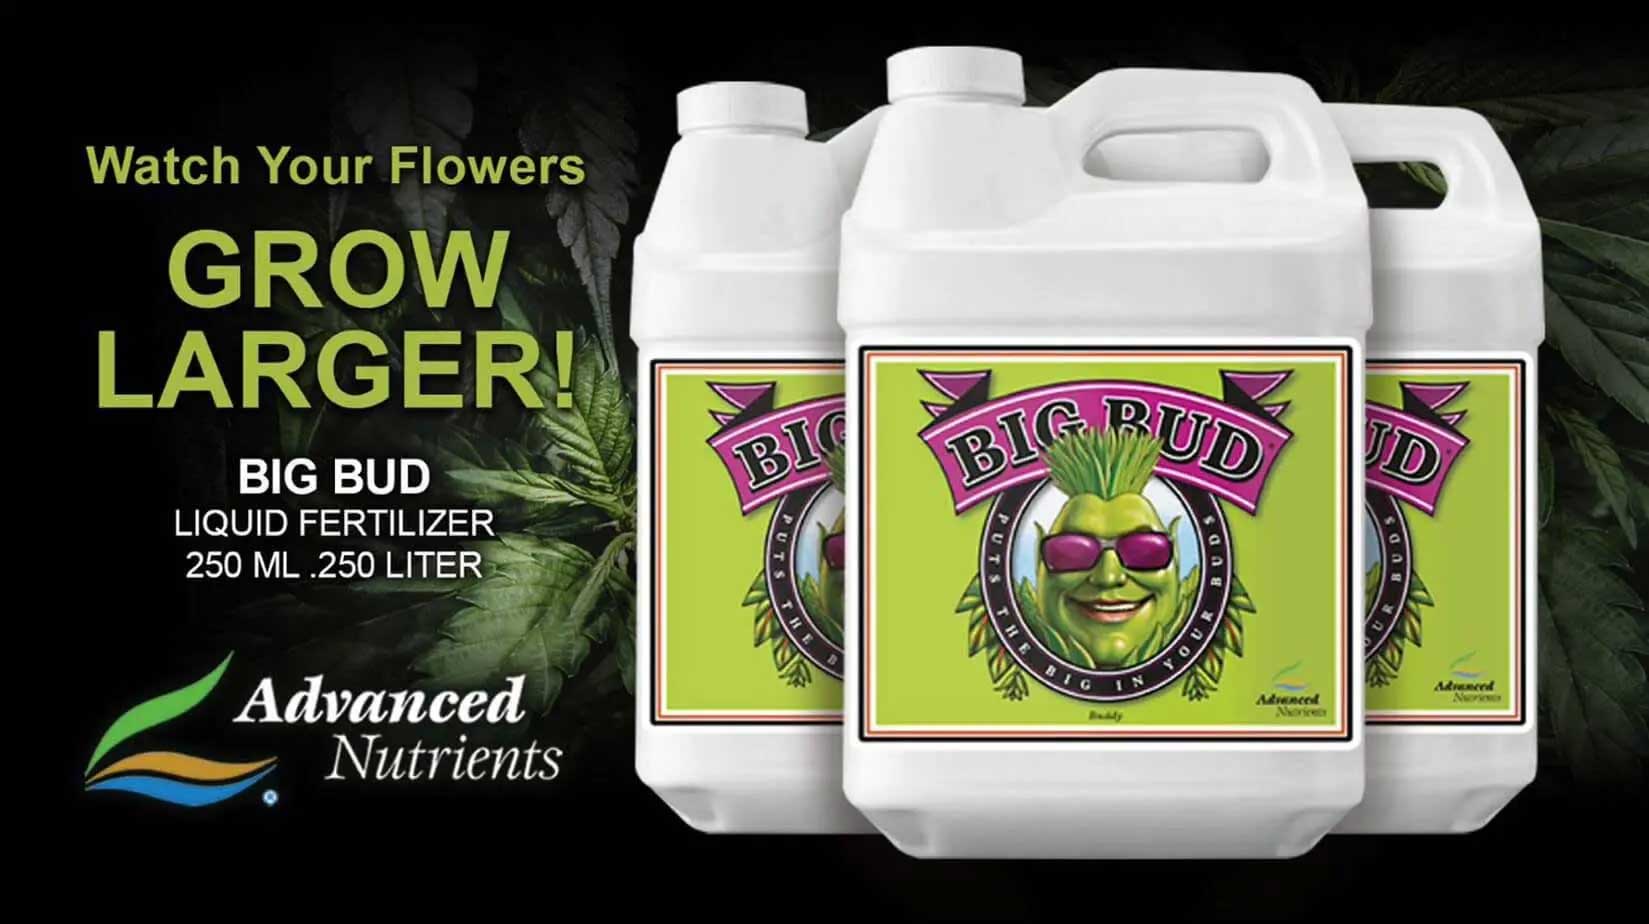 Big Bud Liquid Fertilizer - available at Homegrown Outlet